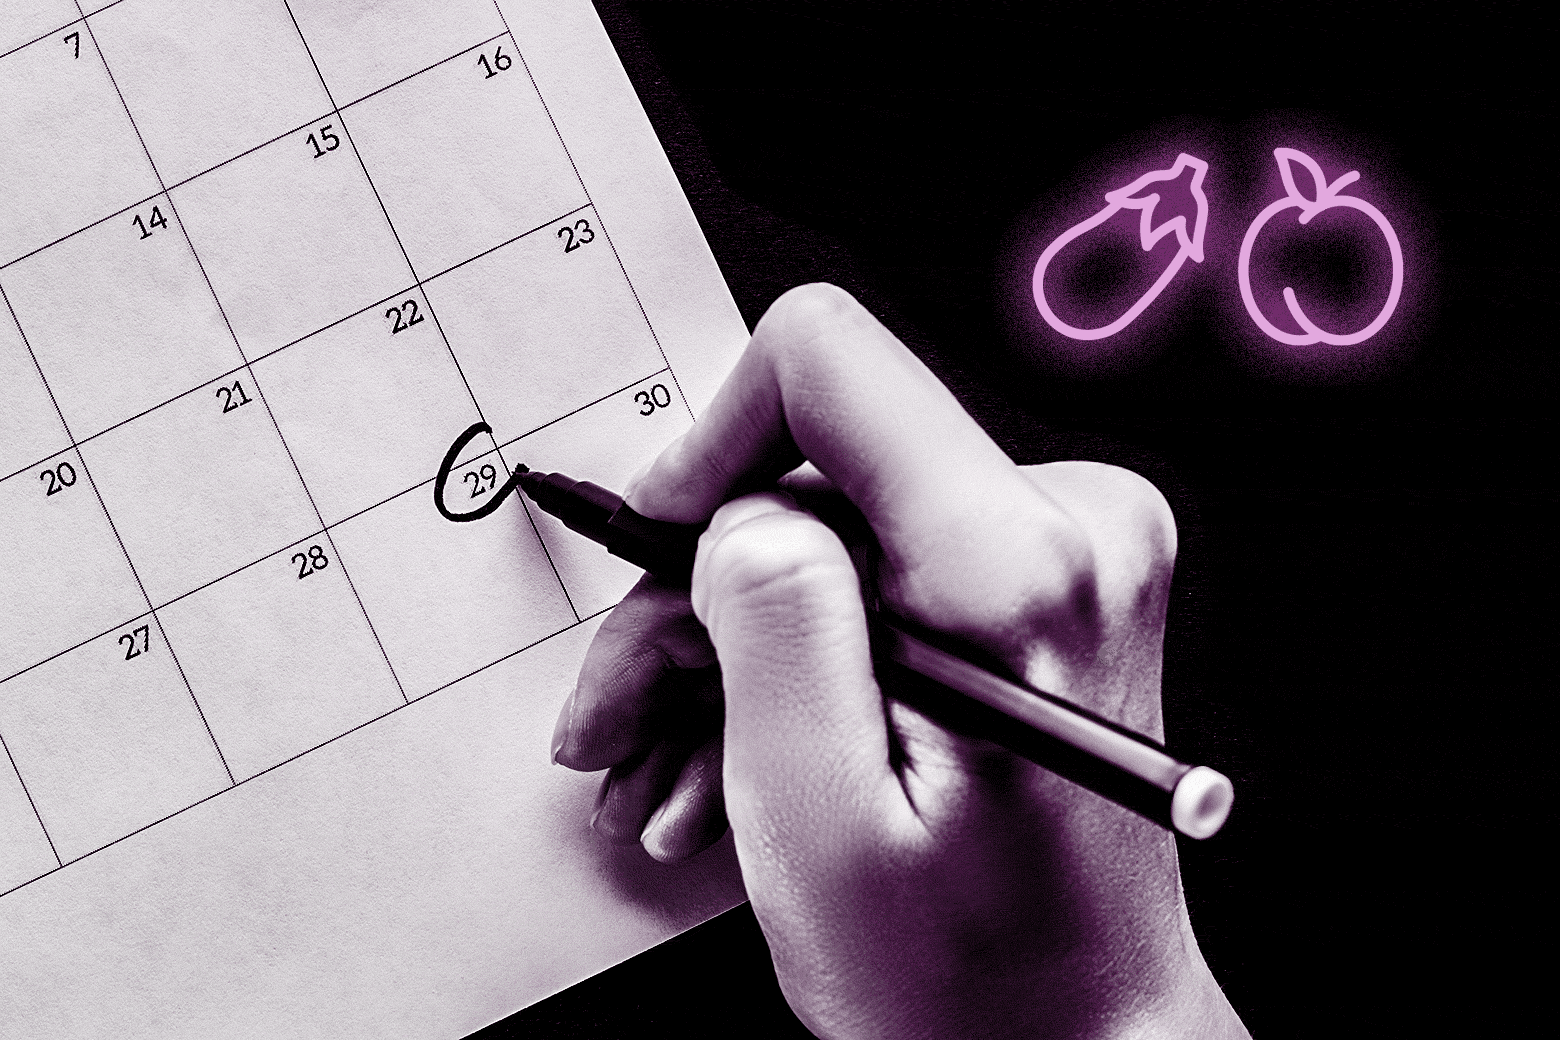 Someone drawing a circle on a calendar.